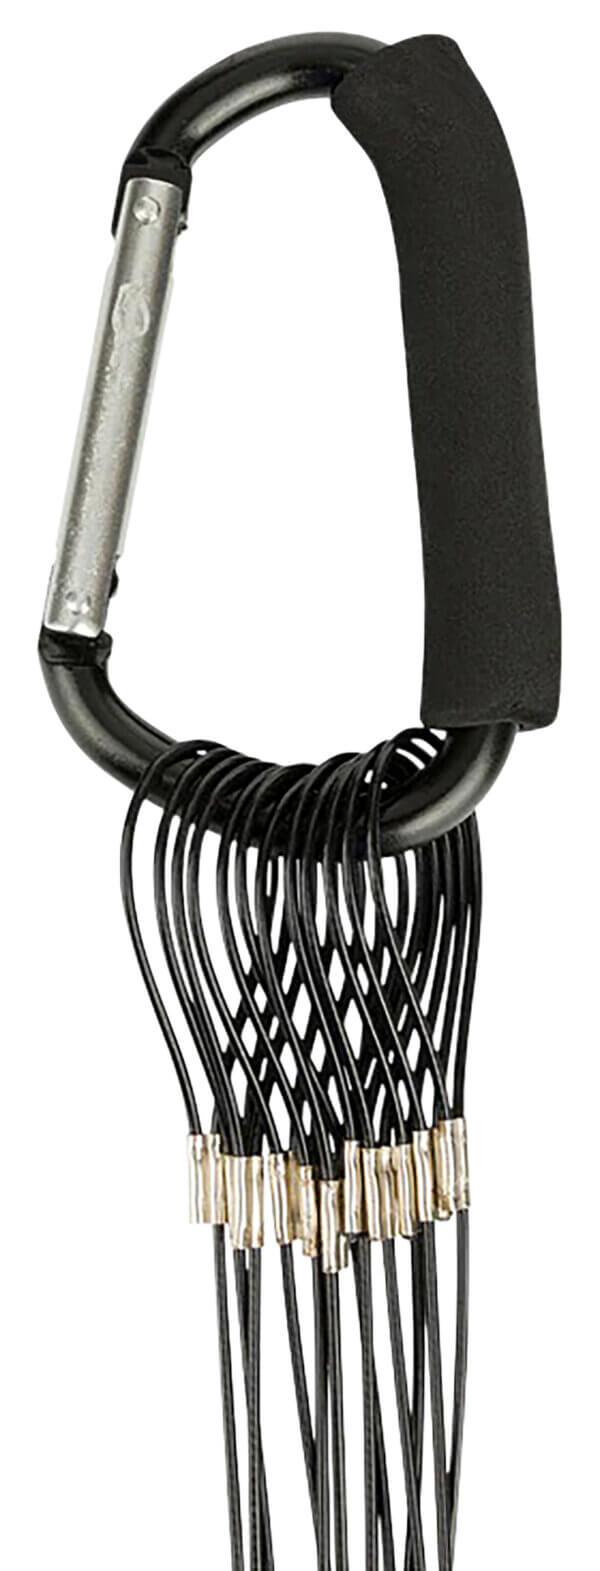 Drake Waterfowl DA9000036004 Texas Rig Package Set 36″ Black Coated Steel Wire 4 oz Lead Weight Metal Cable Crimps Includes Carabiner (12 Pack)